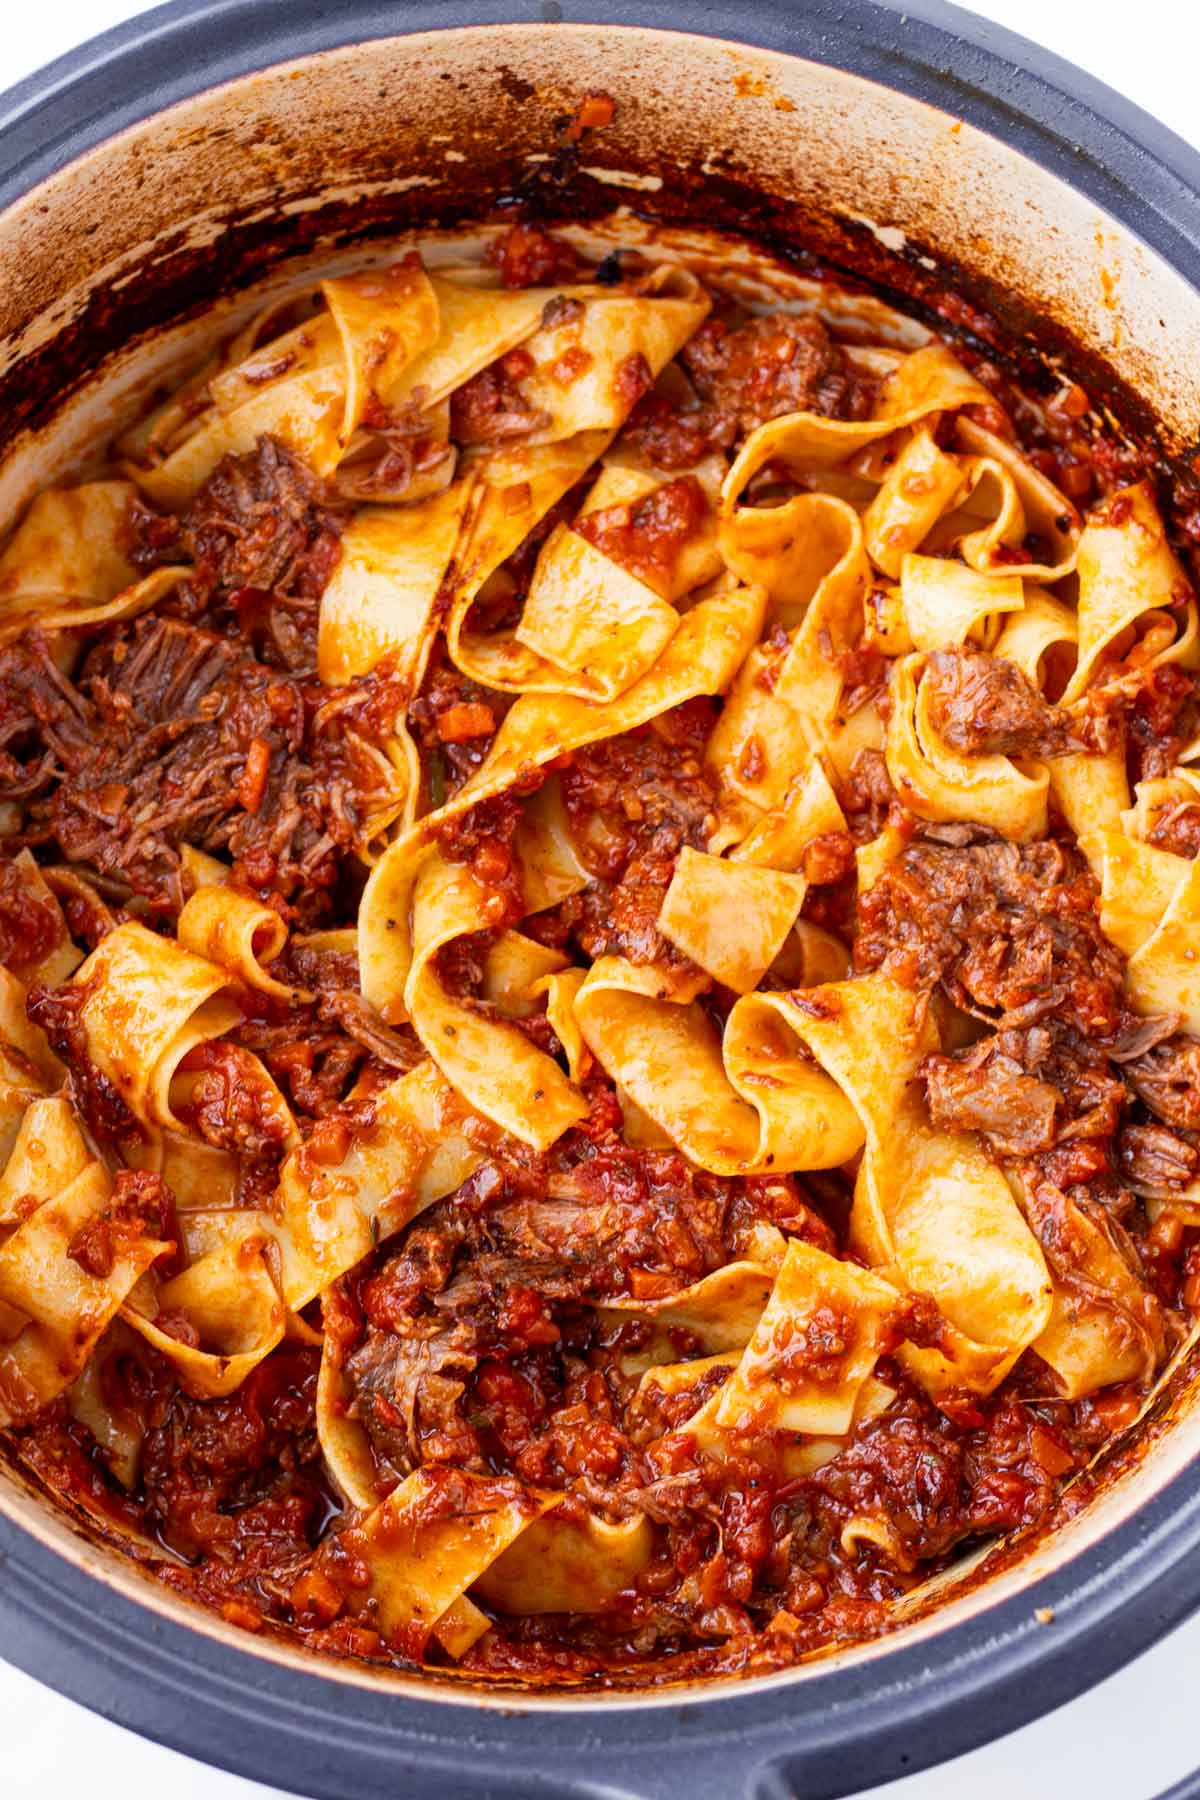 papperdelle with short rib ragu in a pot